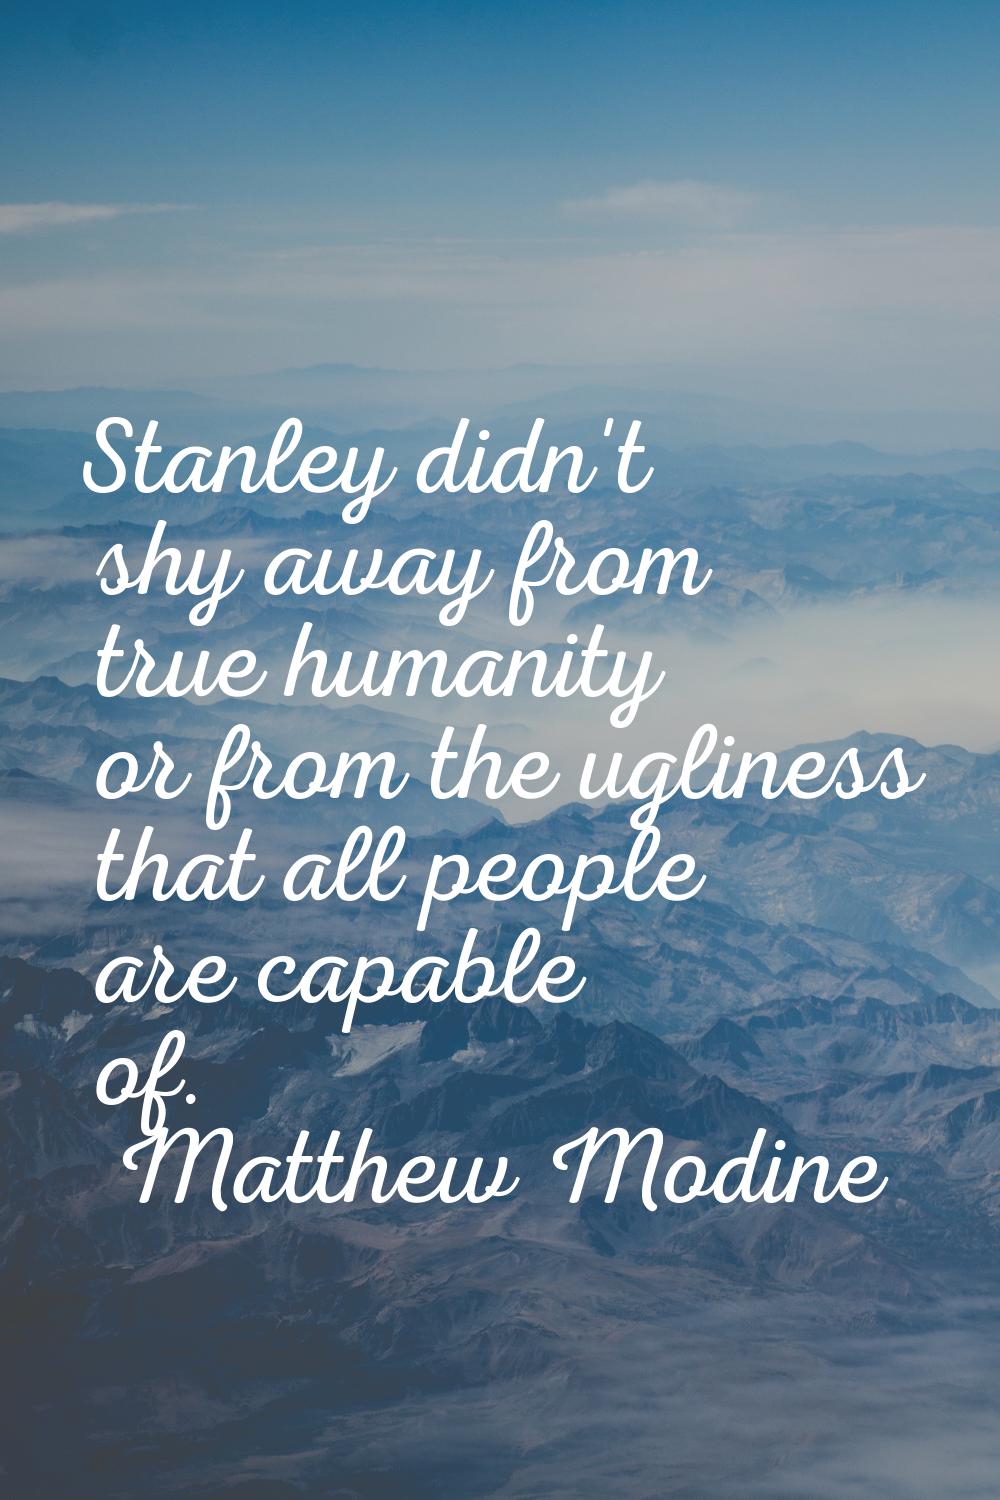 Stanley didn't shy away from true humanity or from the ugliness that all people are capable of.